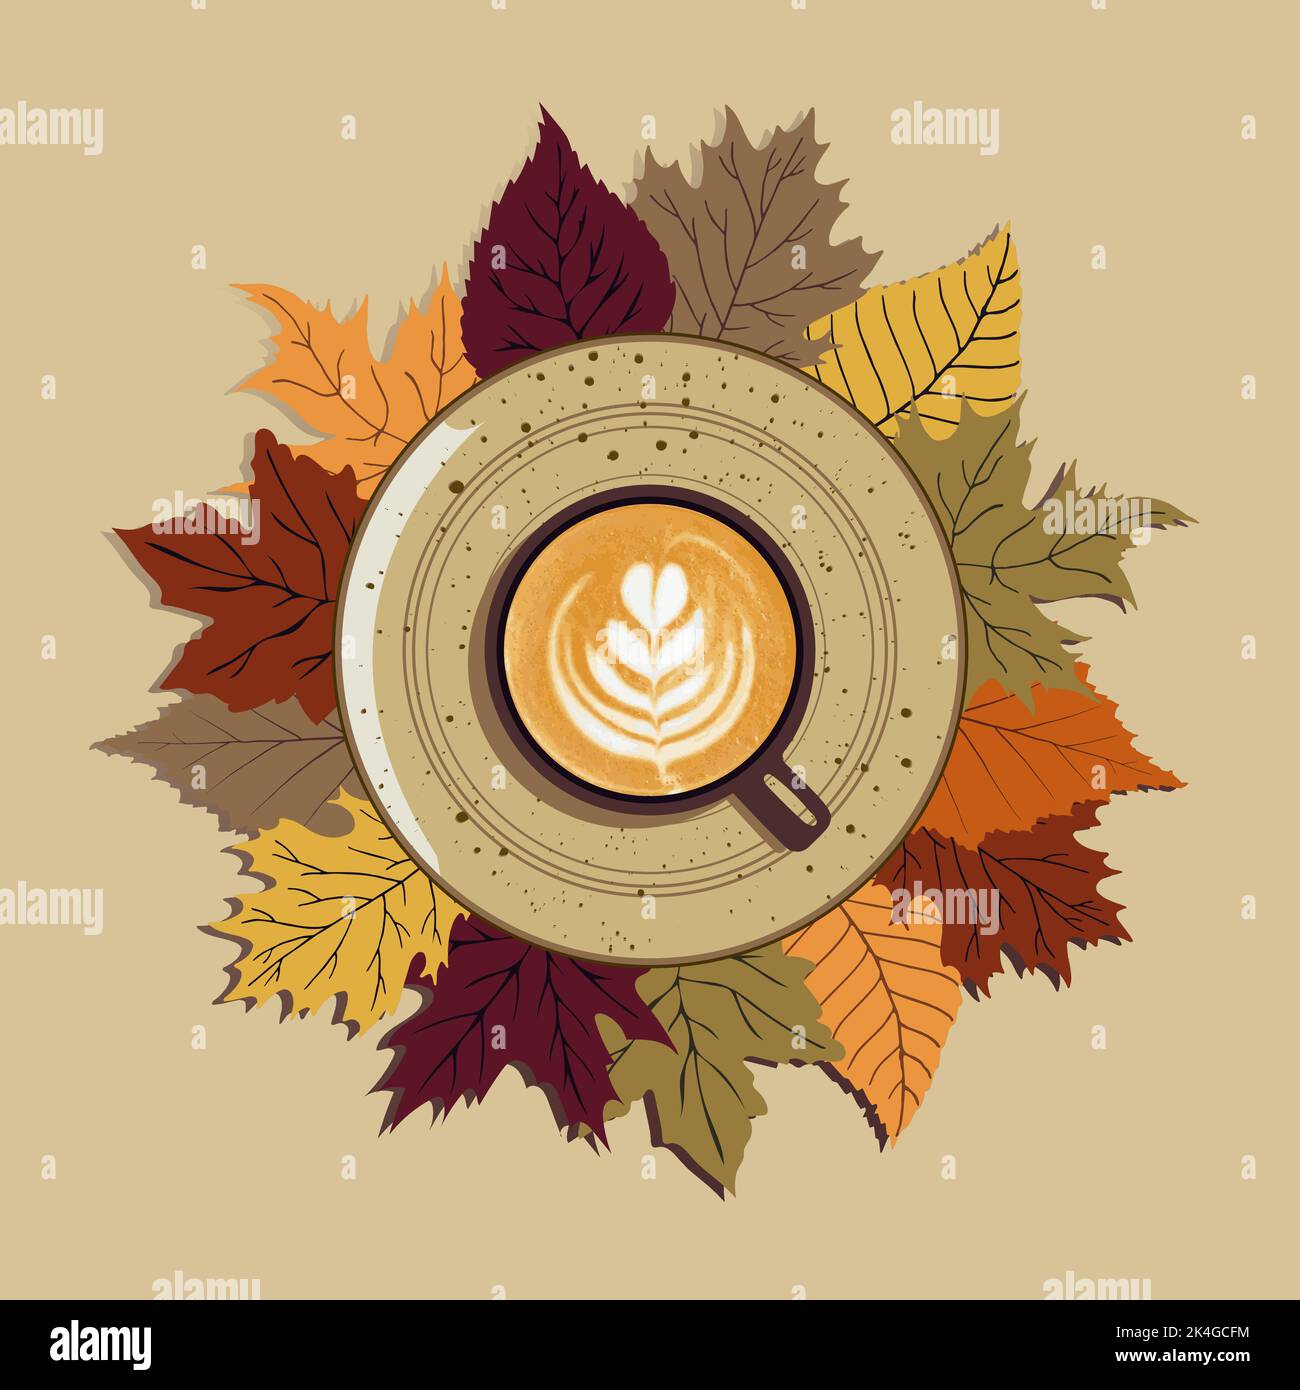 Autumn, fall leaves, hot cup of coffee on a plate against a background of leaves. Seasonal, morning coffee, still life concept. Stock Vector